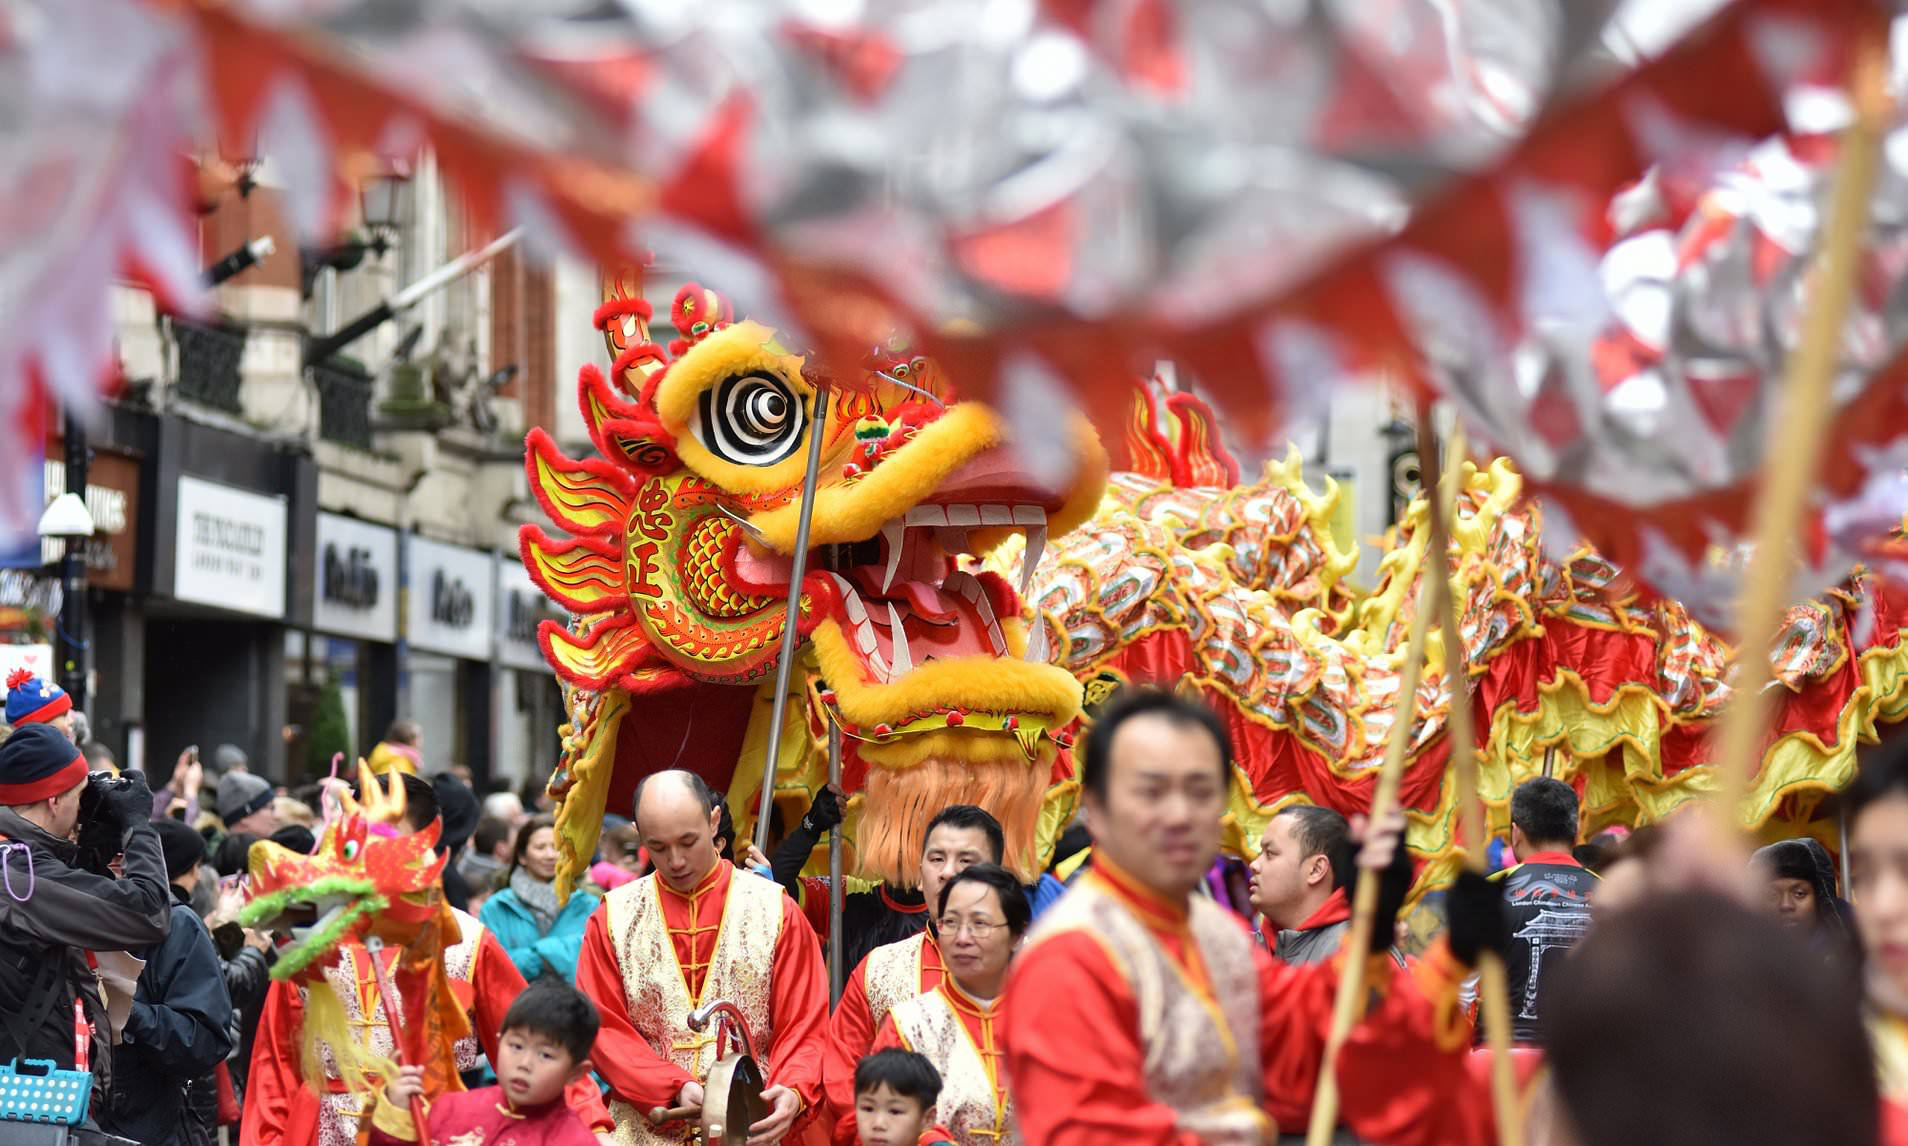 Full list of Chinese New Year events worth knowing about across London